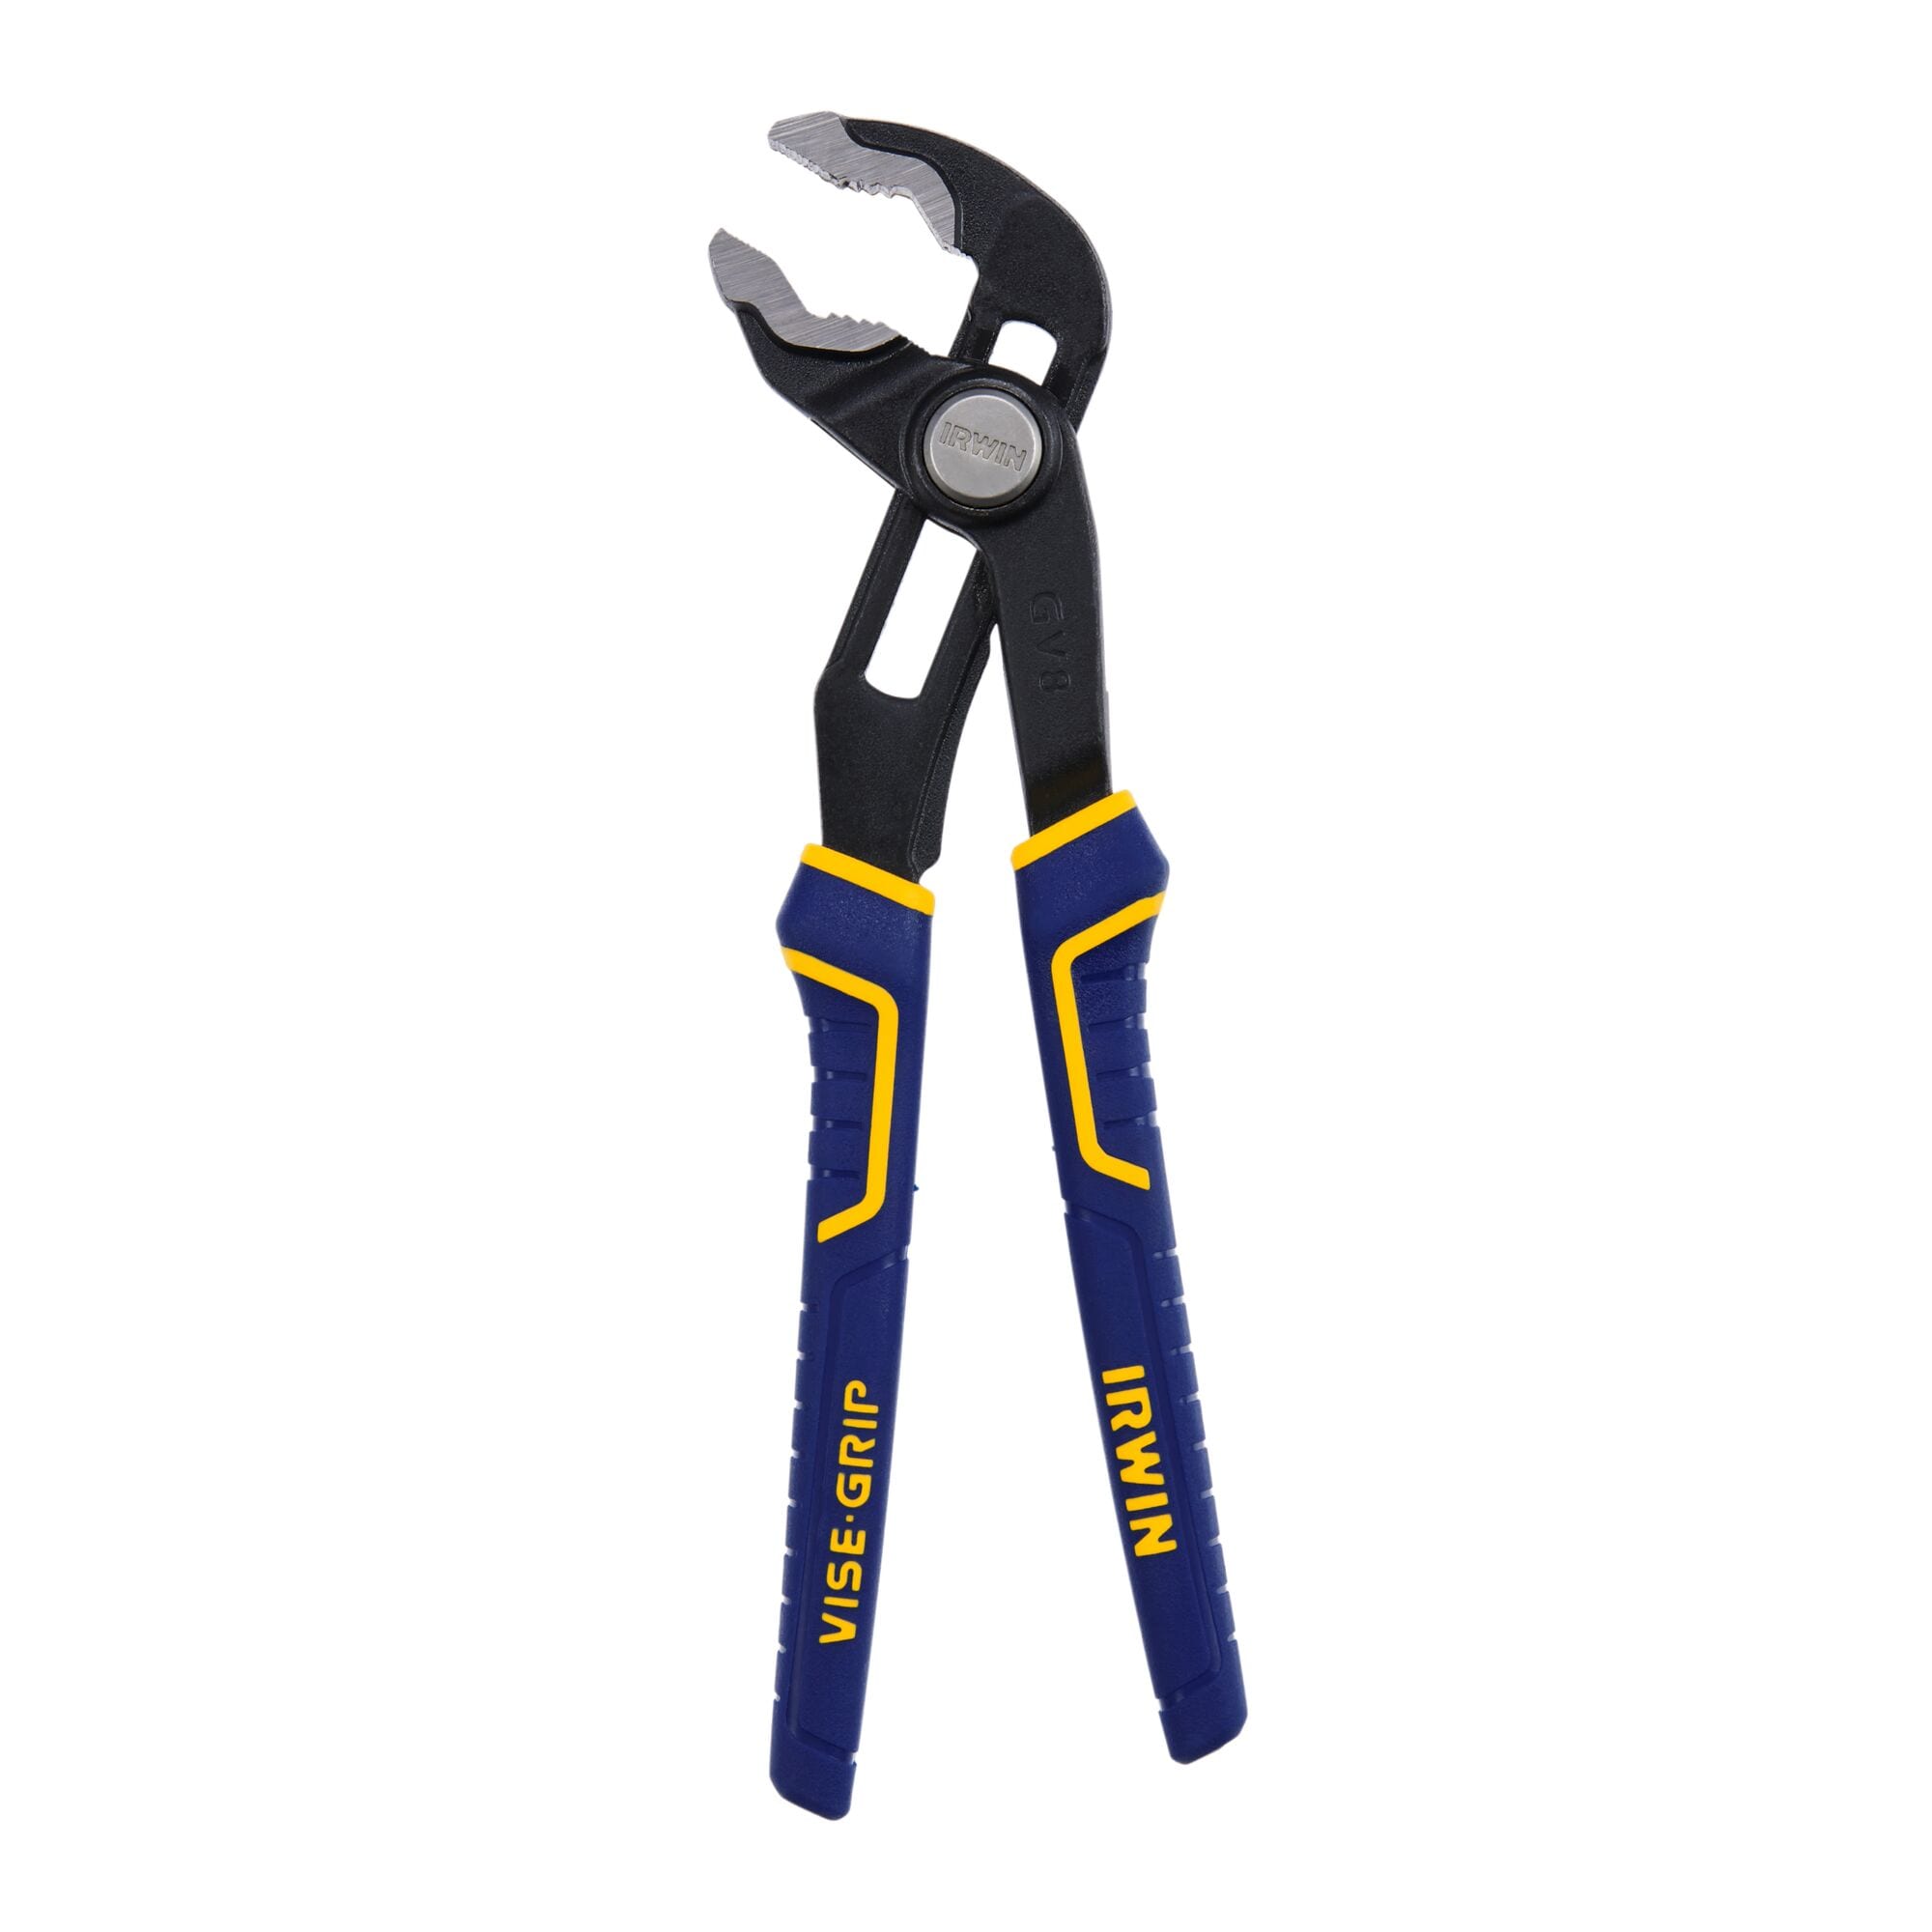 Malco Eagle Grip Locking Plier Combo Pack - 7 and 10 Curved Jaw plus 11  C-Clamp